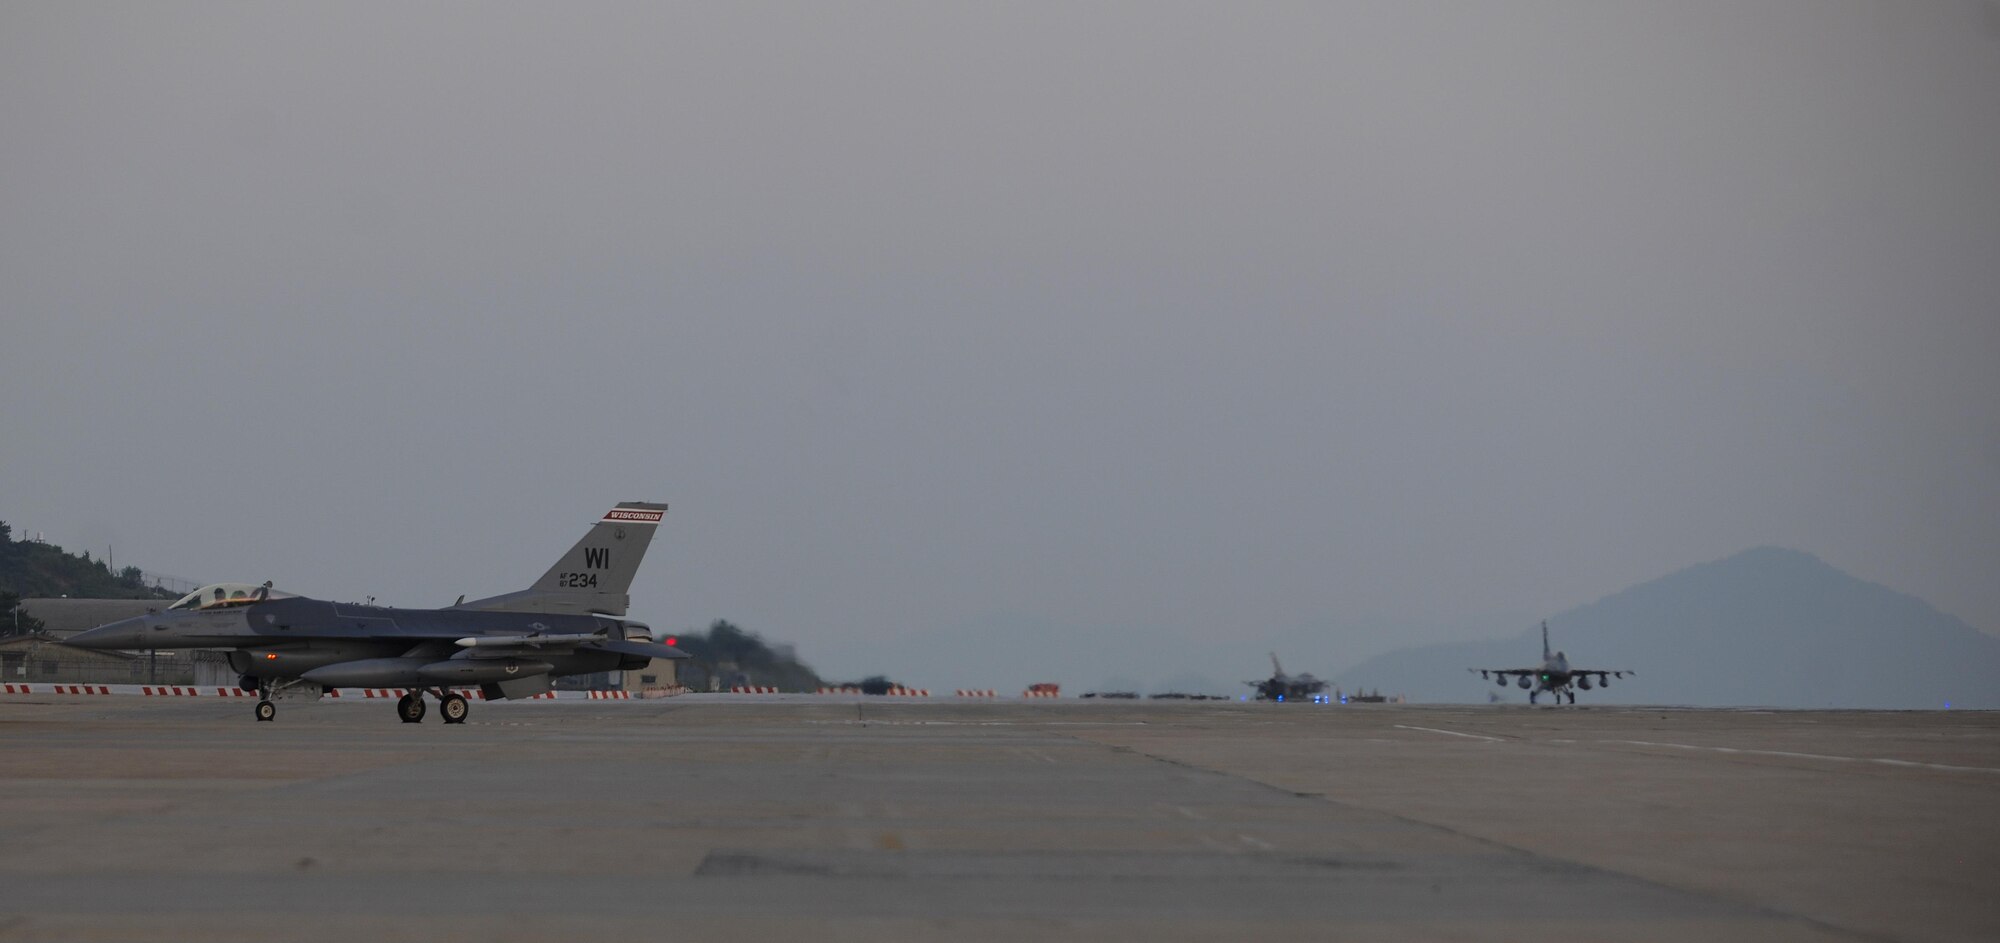 Three F-16 Fighting Falcons, or more commonly known as Vipers, assigned to the 176th Fighter Squadron, 115th Fighter Wing, Wisconsin Air National Guard taxi at Kunsan Air Base, Republic of Korea, Aug. 8, 2017.